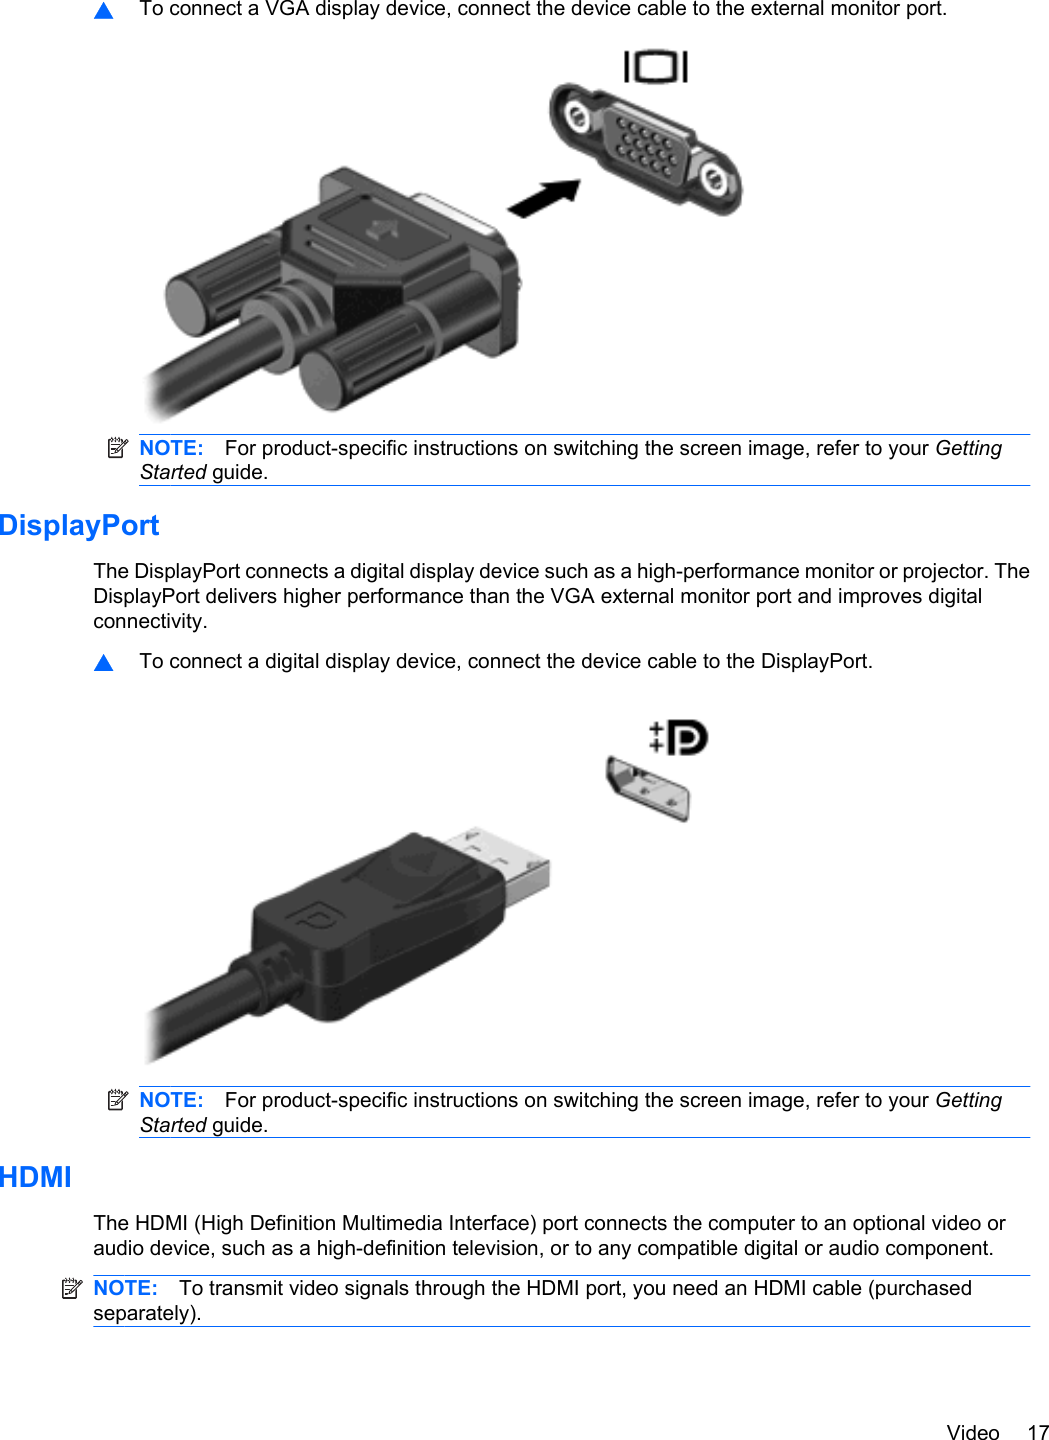 ▲To connect a VGA display device, connect the device cable to the external monitor port.NOTE: For product-specific instructions on switching the screen image, refer to your GettingStarted guide.DisplayPortThe DisplayPort connects a digital display device such as a high-performance monitor or projector. TheDisplayPort delivers higher performance than the VGA external monitor port and improves digitalconnectivity.▲To connect a digital display device, connect the device cable to the DisplayPort.NOTE: For product-specific instructions on switching the screen image, refer to your GettingStarted guide.HDMIThe HDMI (High Definition Multimedia Interface) port connects the computer to an optional video oraudio device, such as a high-definition television, or to any compatible digital or audio component.NOTE: To transmit video signals through the HDMI port, you need an HDMI cable (purchasedseparately).Video 17